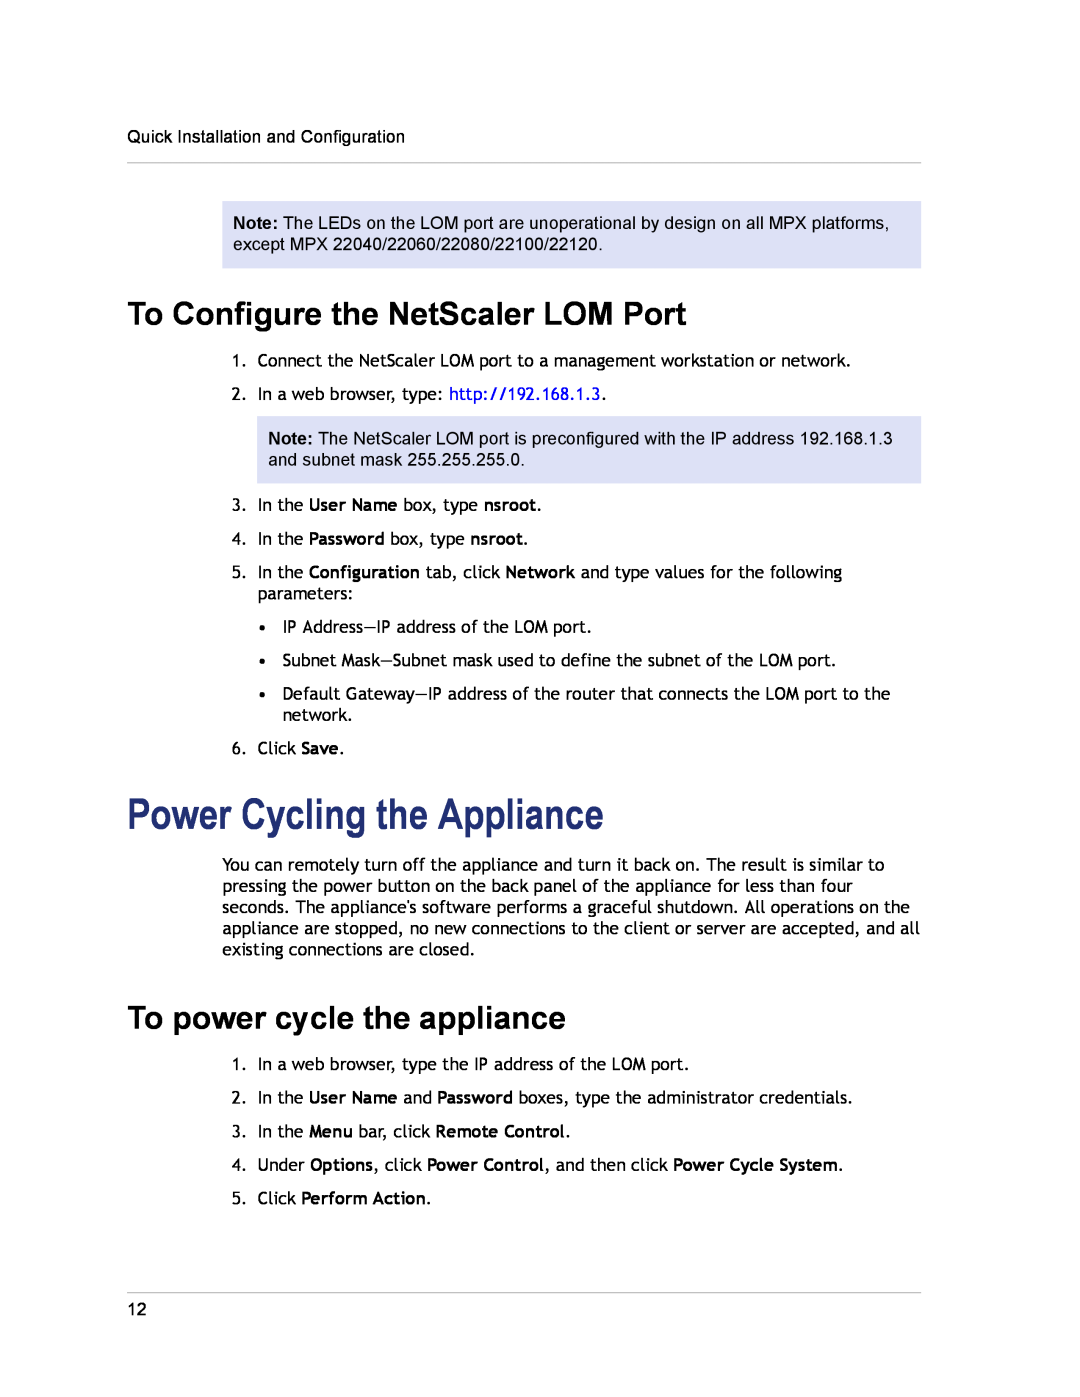 Citrix Systems 8800, 8600 Power Cycling the Appliance, To Configure the NetScaler LOM Port, To power cycle the appliance 